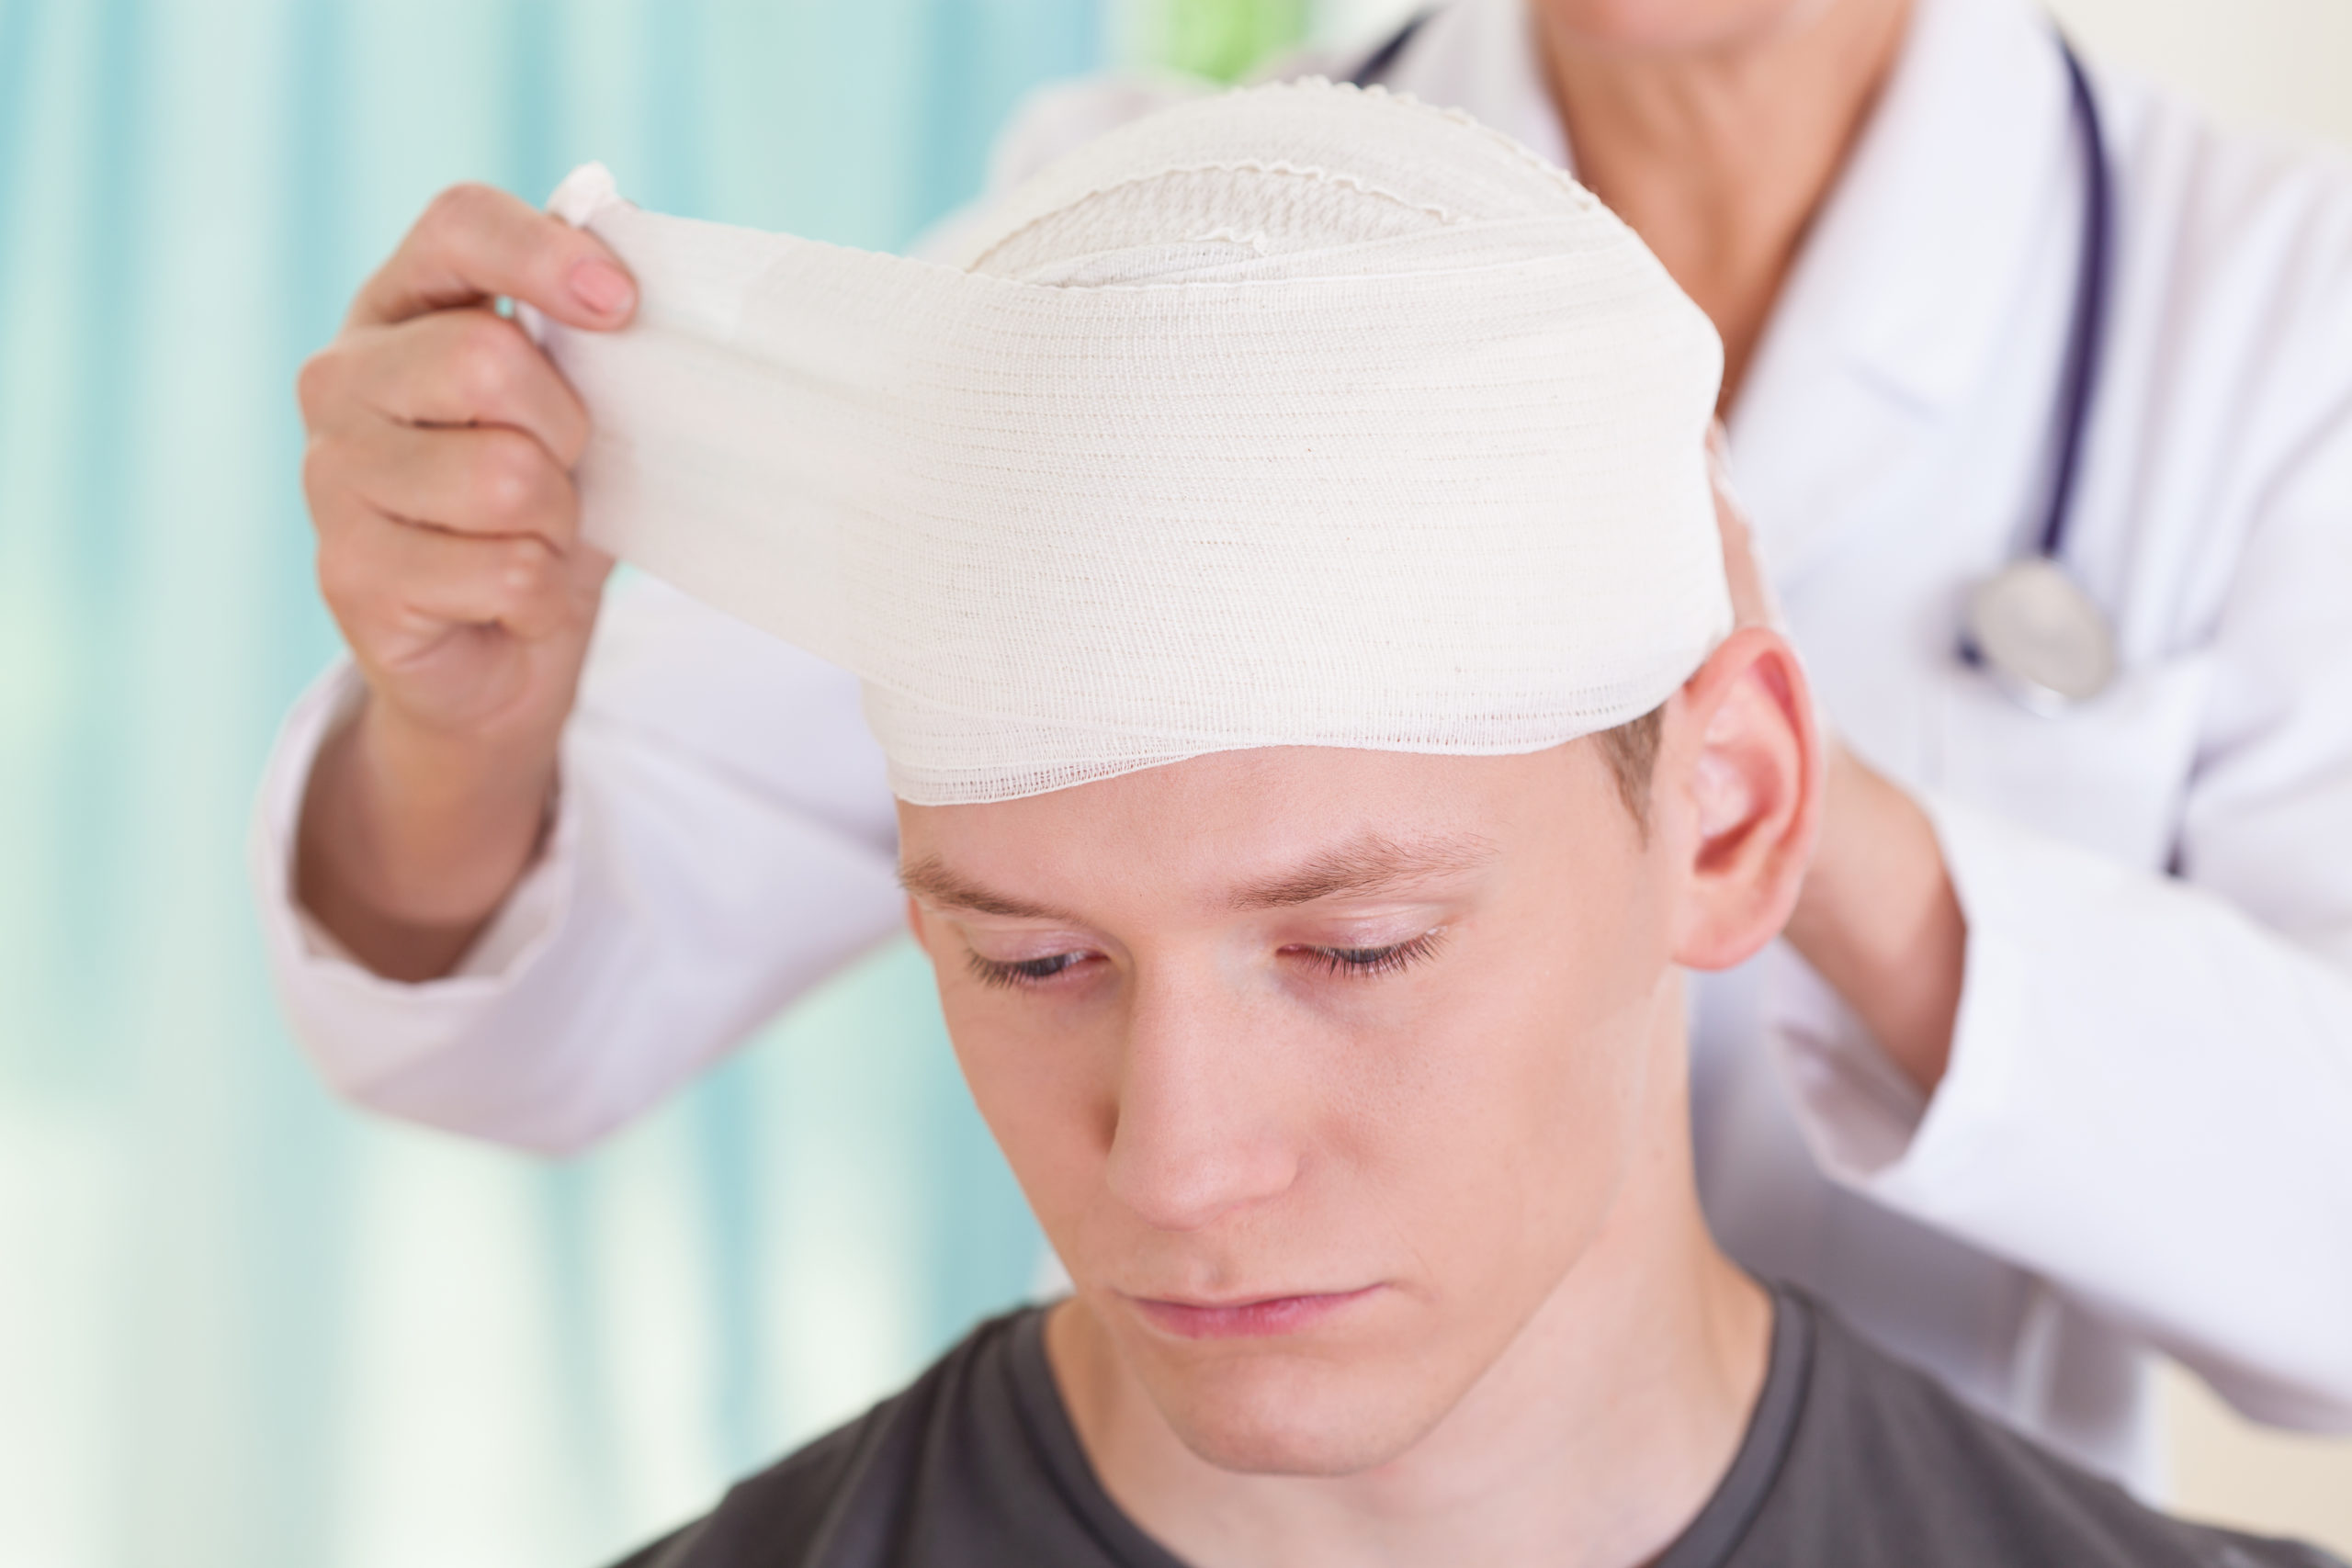 brain injuries account to thirty percent of all injury related deaths in the us